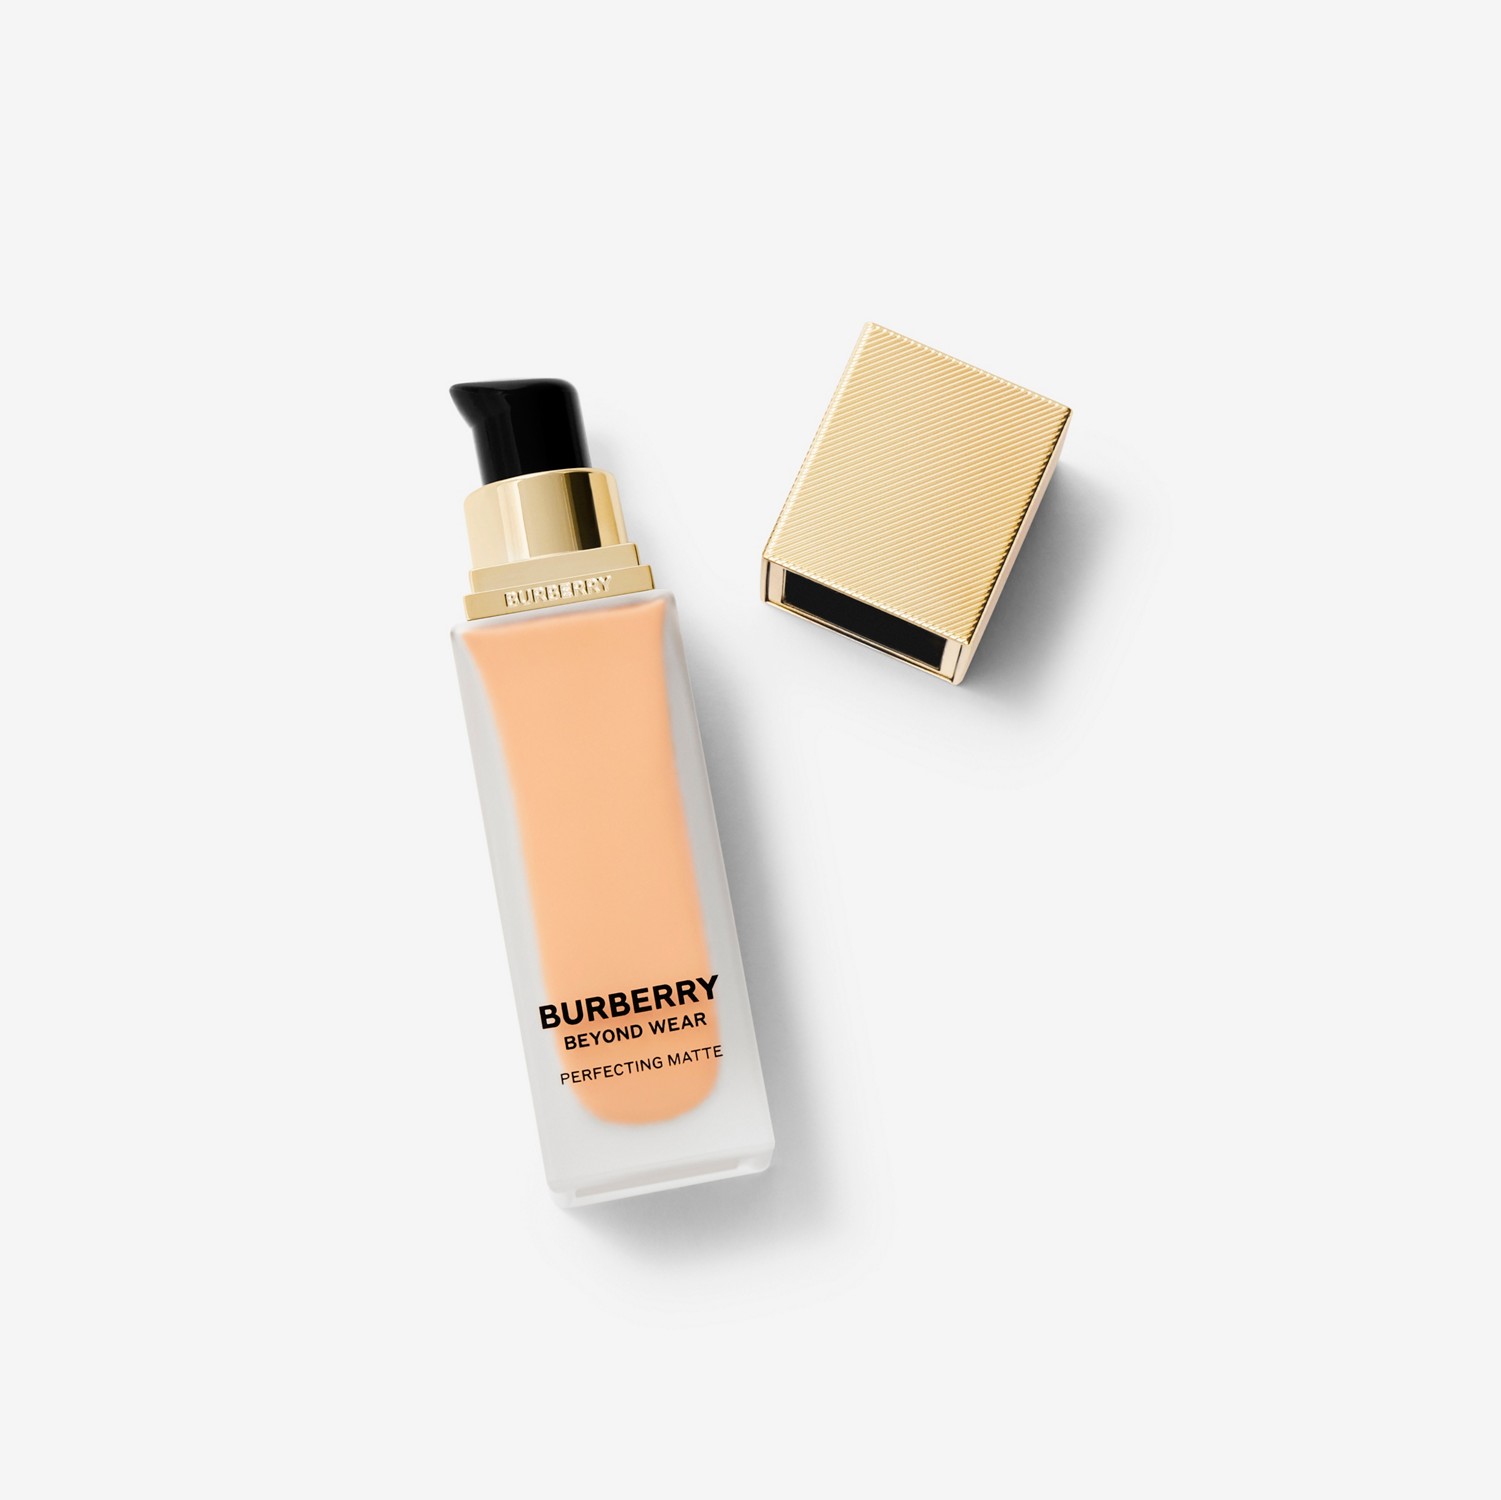 Beyond Wear Perfecting Matte Foundation – 40 Light Warm - Mulheres | Burberry® oficial